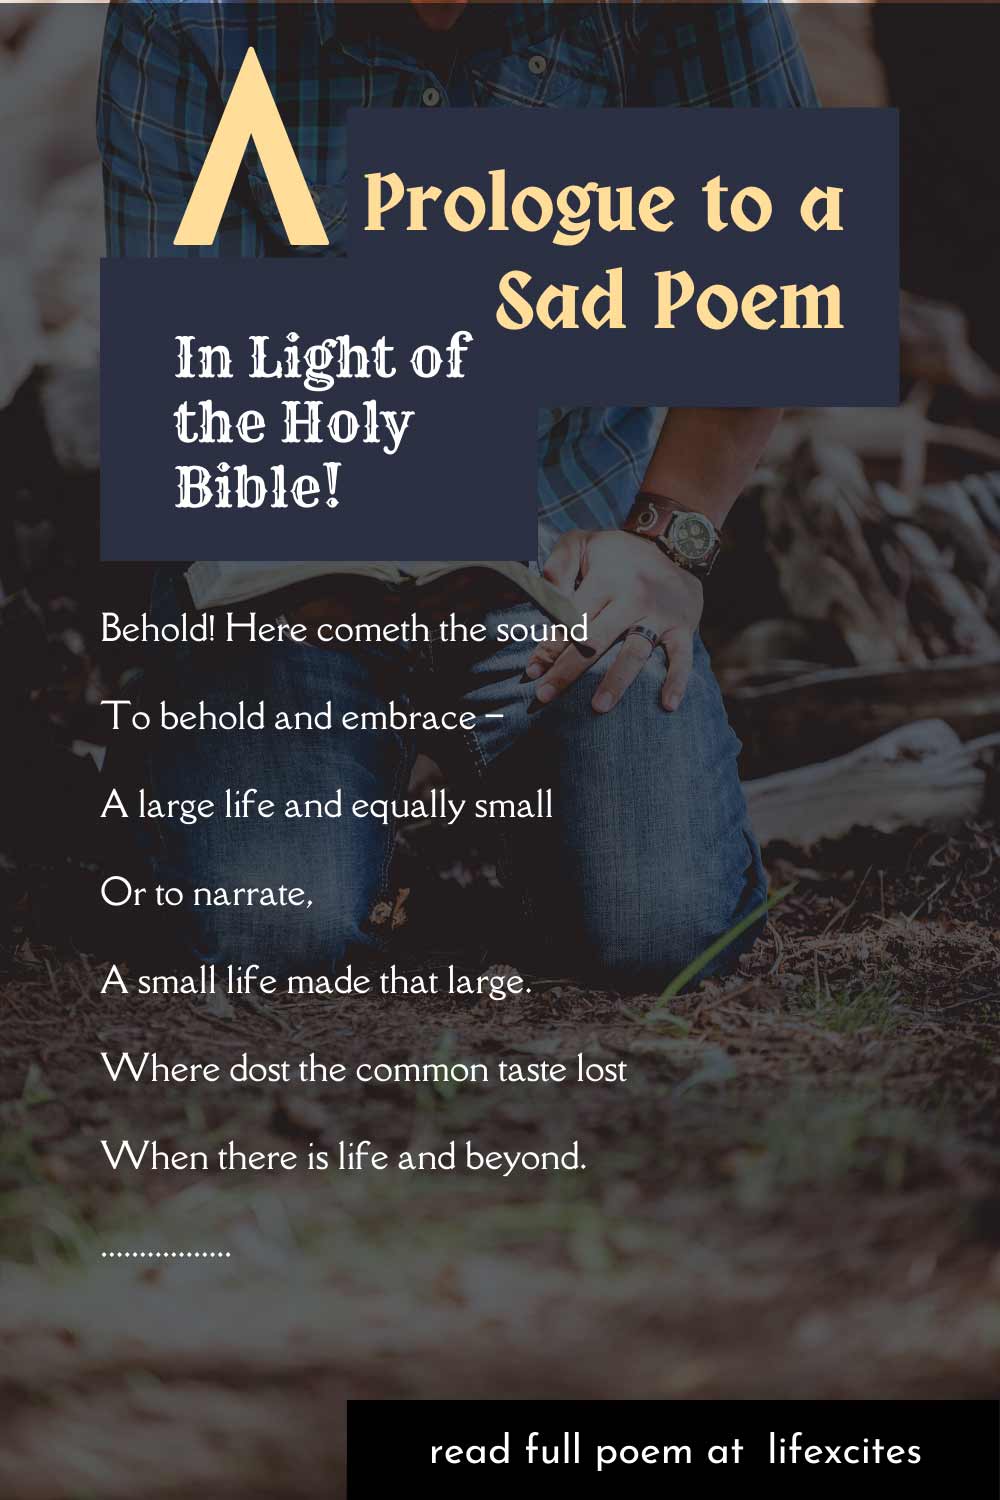 A-Prologue-to-a-Sad-Poem-In-Light-of-the-Holy-Bible